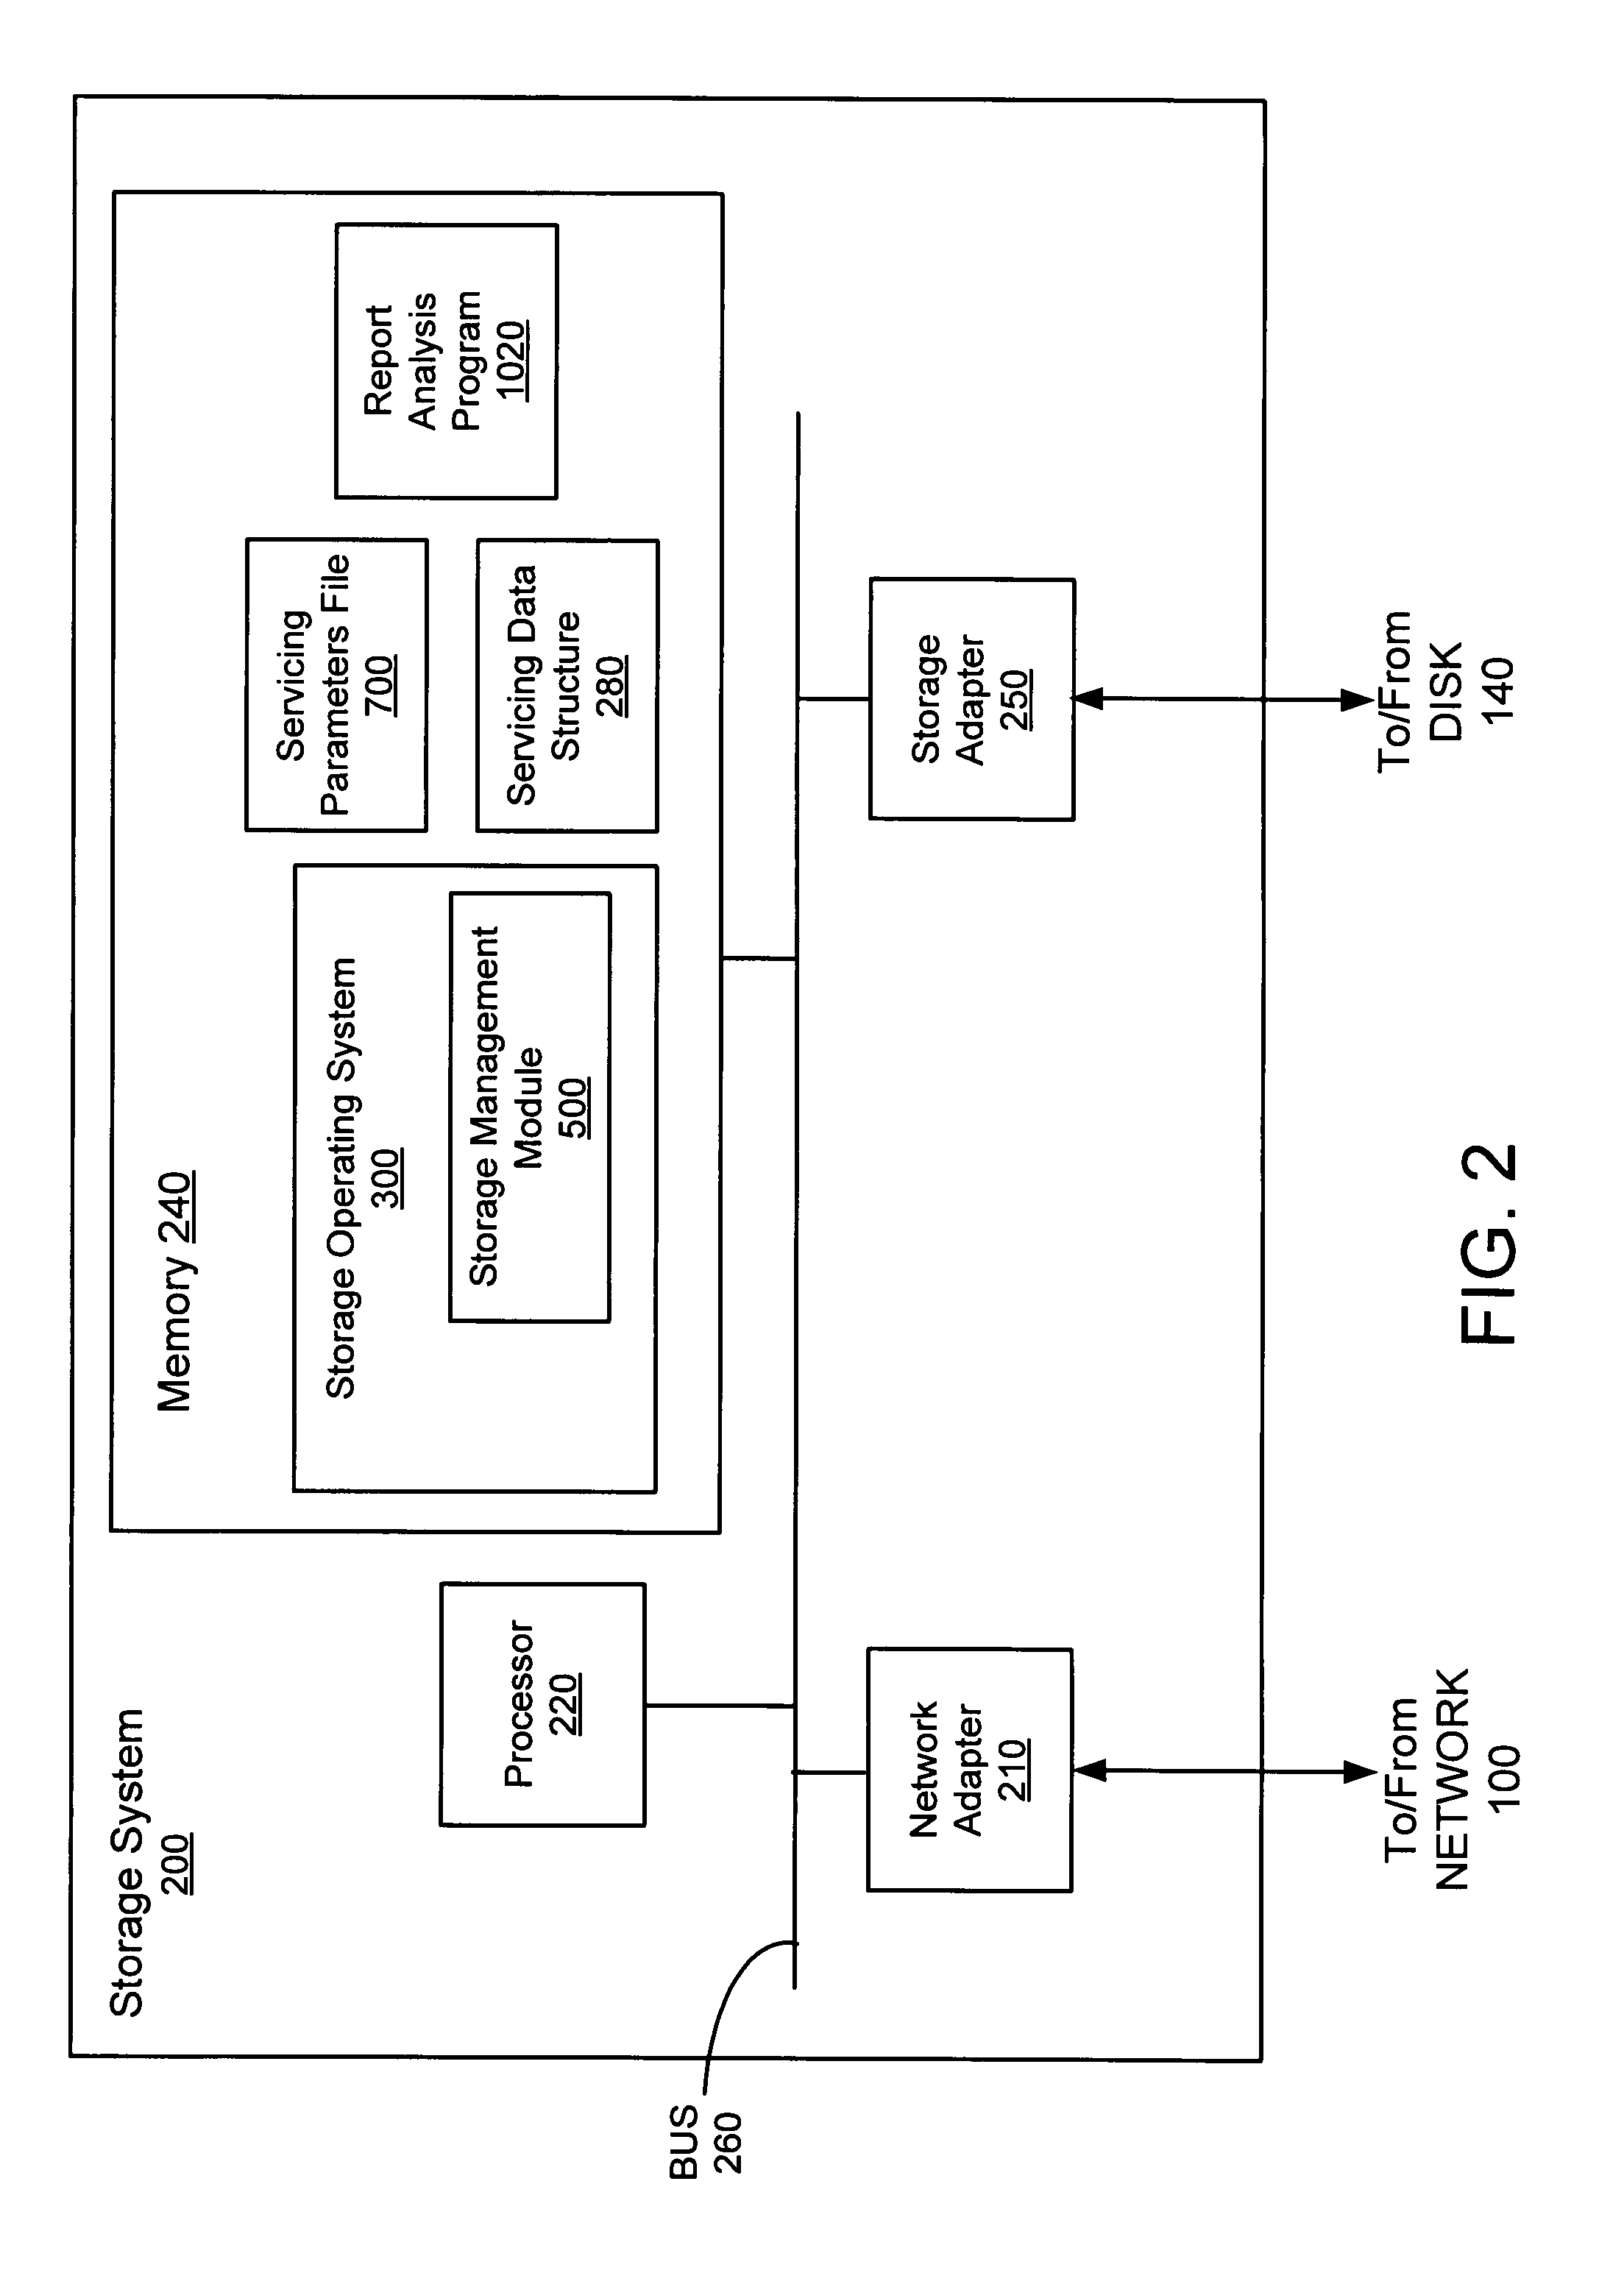 Evaluating and repairing errors during servicing of storage devices